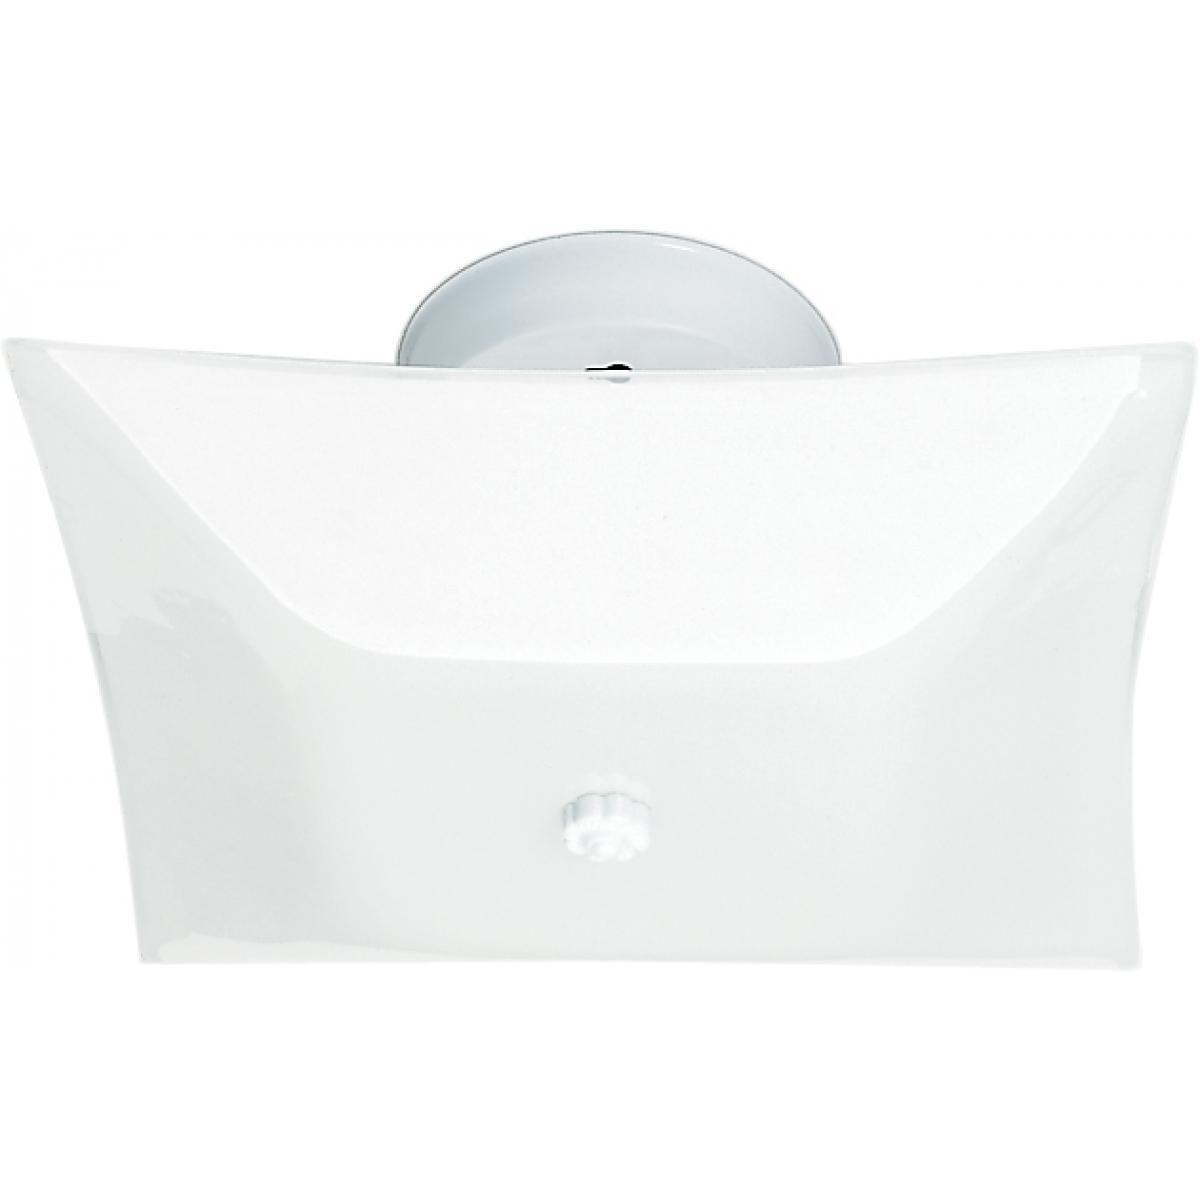 2 Light 12" Ceiling Fixture White Square Ceiling Nuvo Lighting 